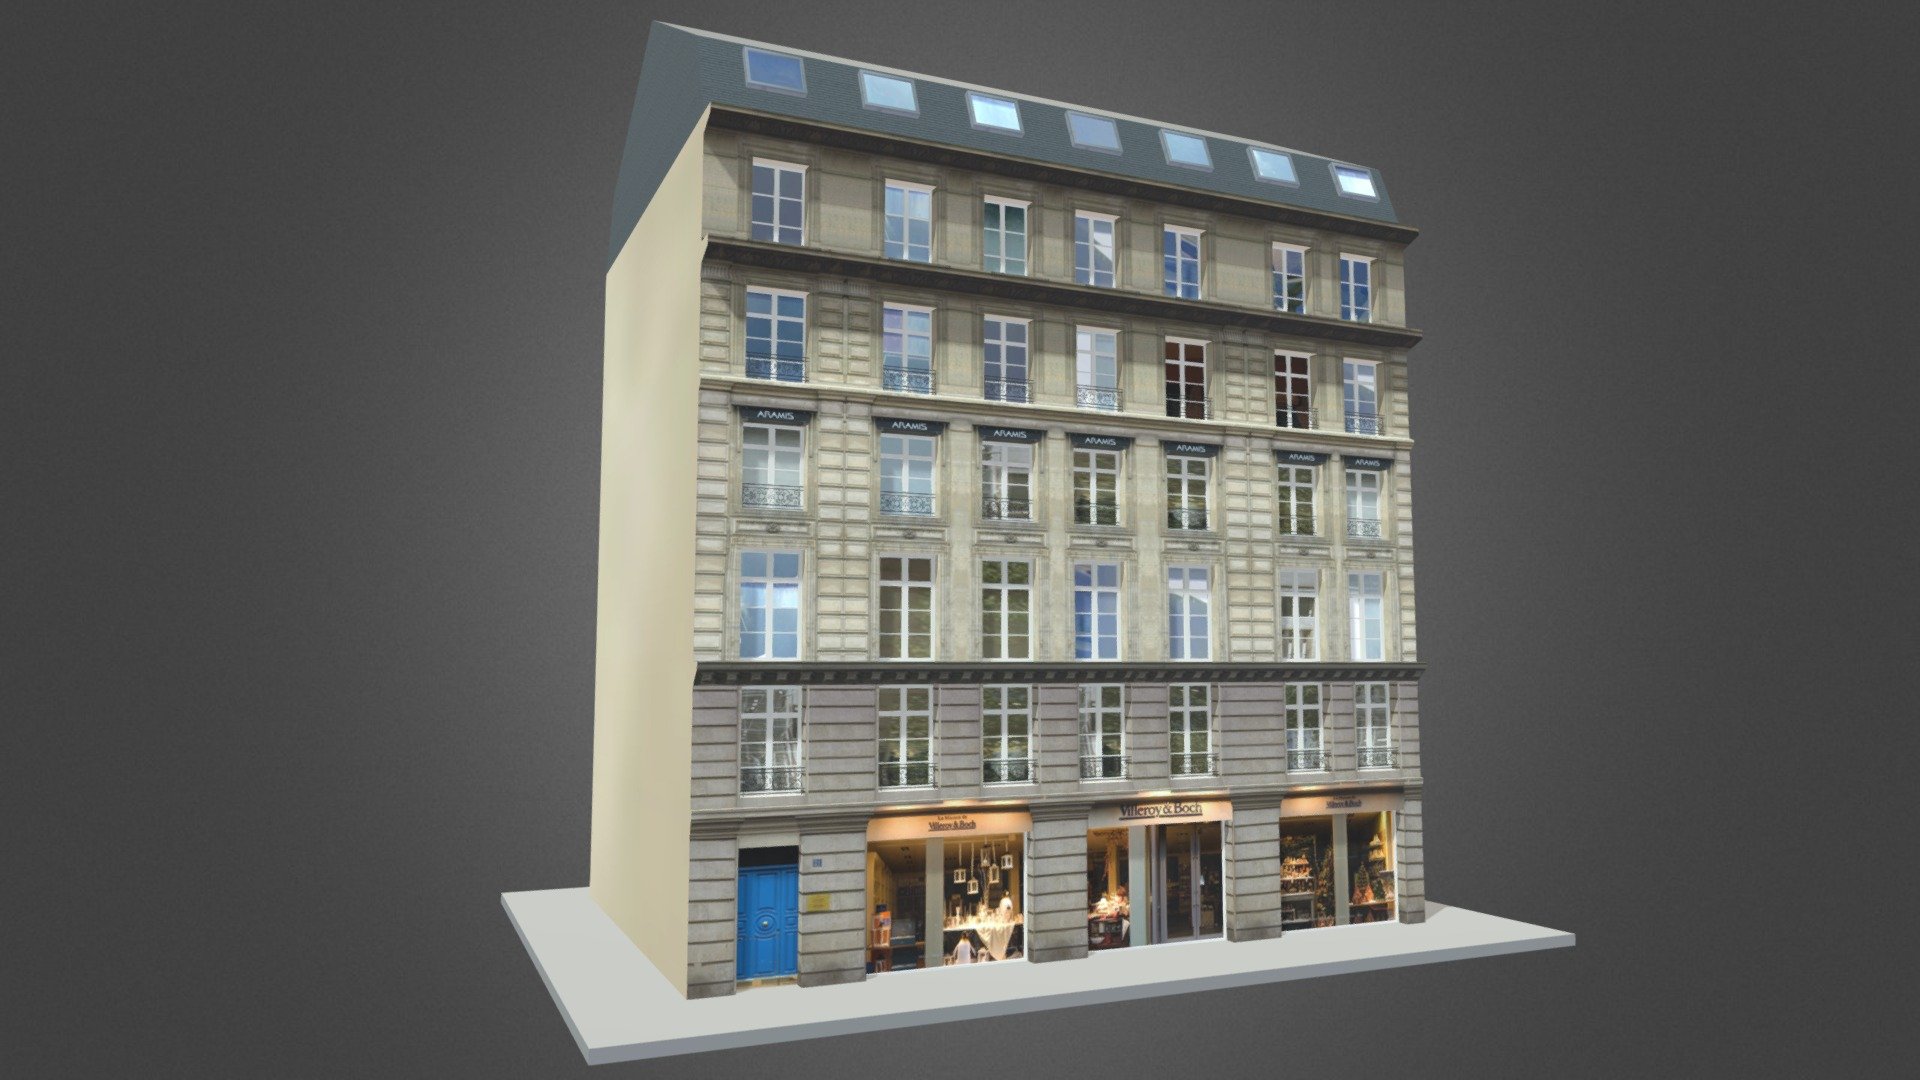 Typical Parisian Corner Building
Originally created with 3ds Max 2015 and rendered in V-Ray 3.0. Including Cinema 4D R13 Version

Total Poly Counts:
Poly Count = 68203
Vertex Count = 70783 - Typical Parisian Corner Building 02 - 3D model by nuralam018 3d model